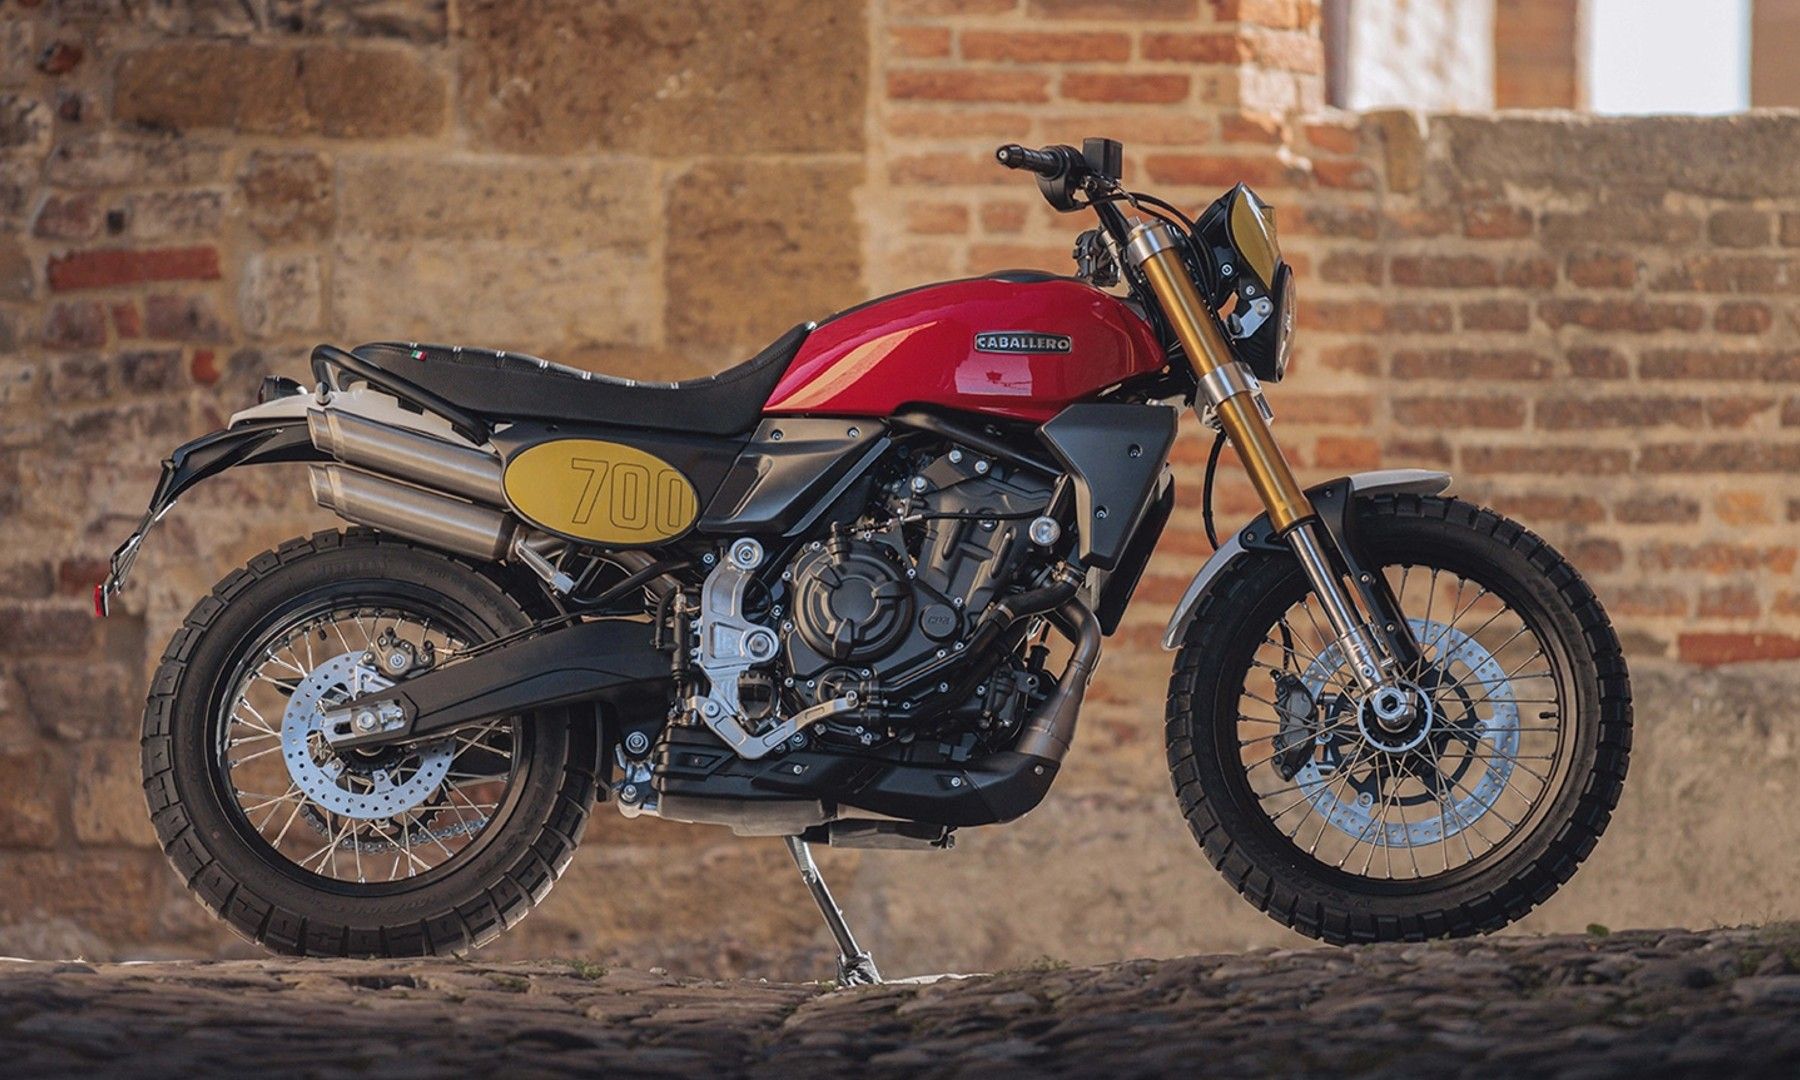 Fantic Caballero 700: An Italian Scrambler That Could Take America By Storm